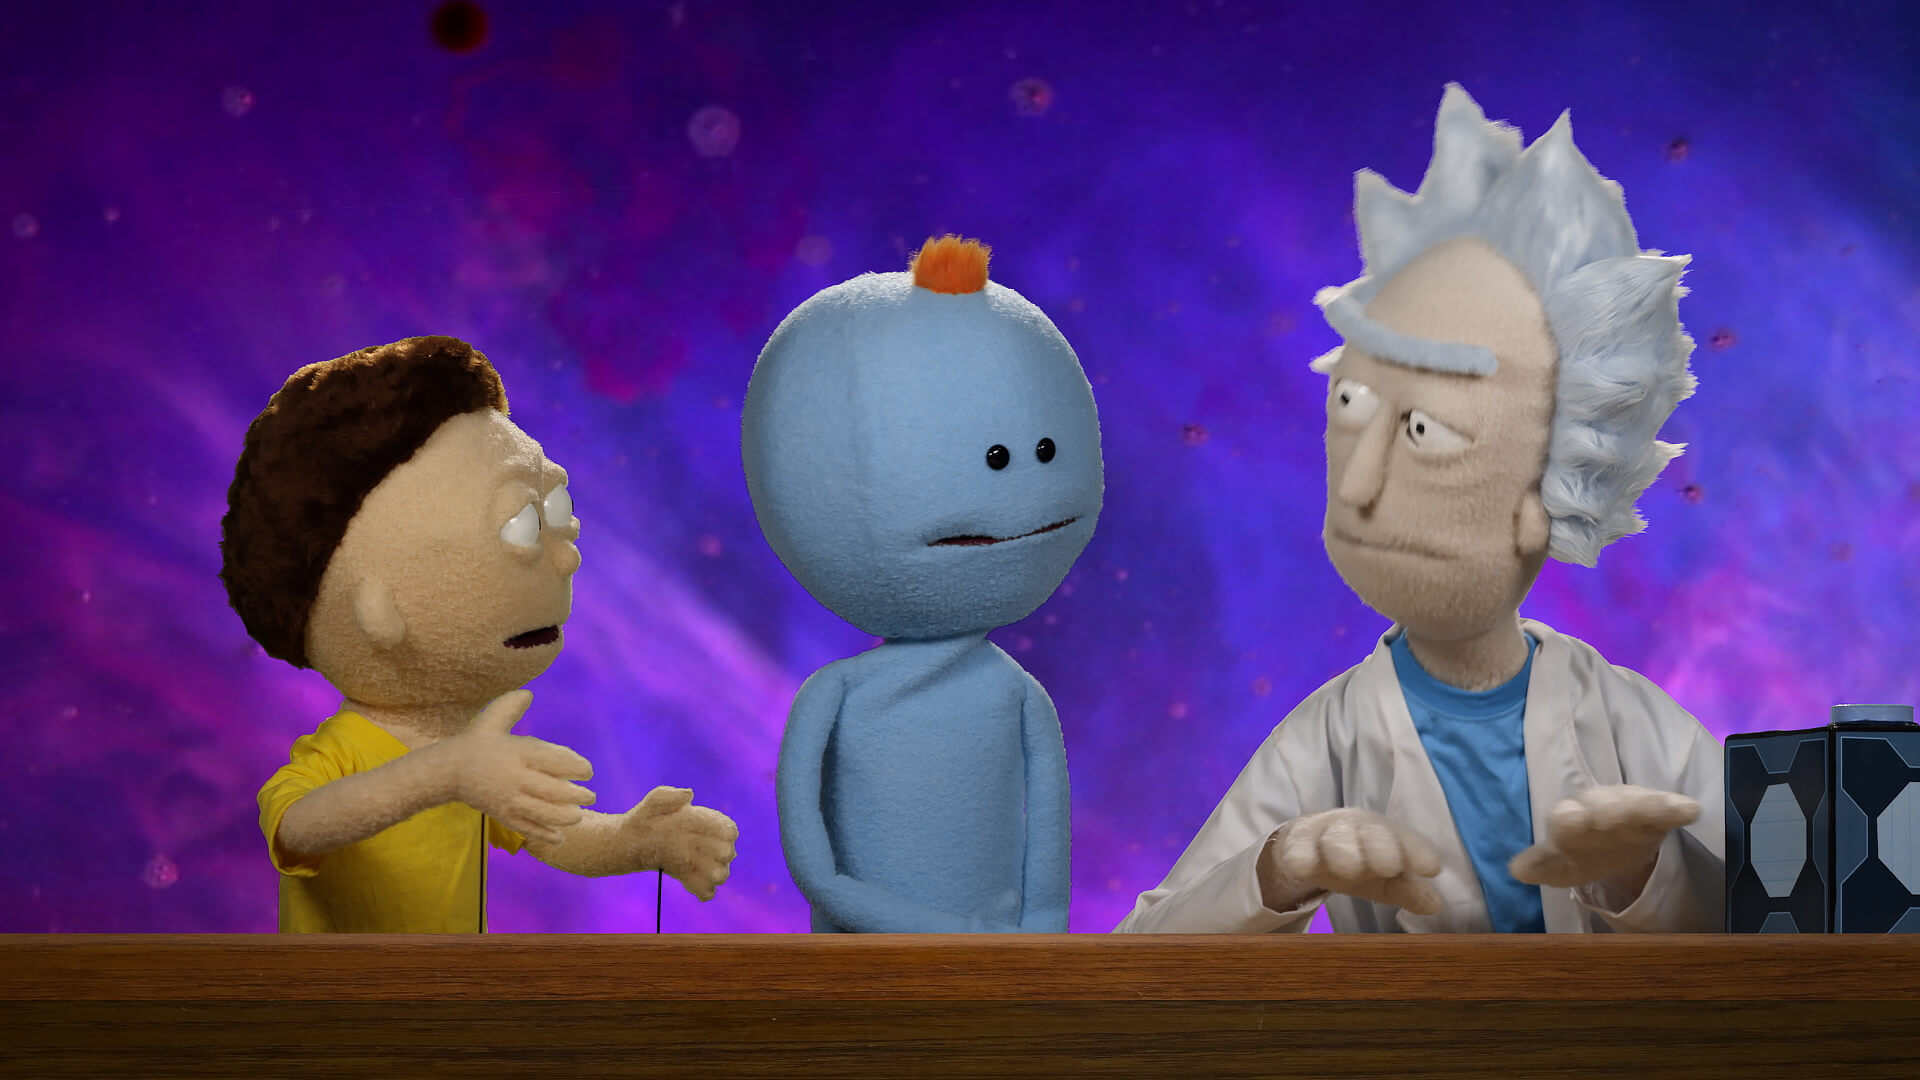 Rick, Morty and Meseeks puppets from the Rick and Morty Blu-ray commercial shot and edited by Todd Bishop